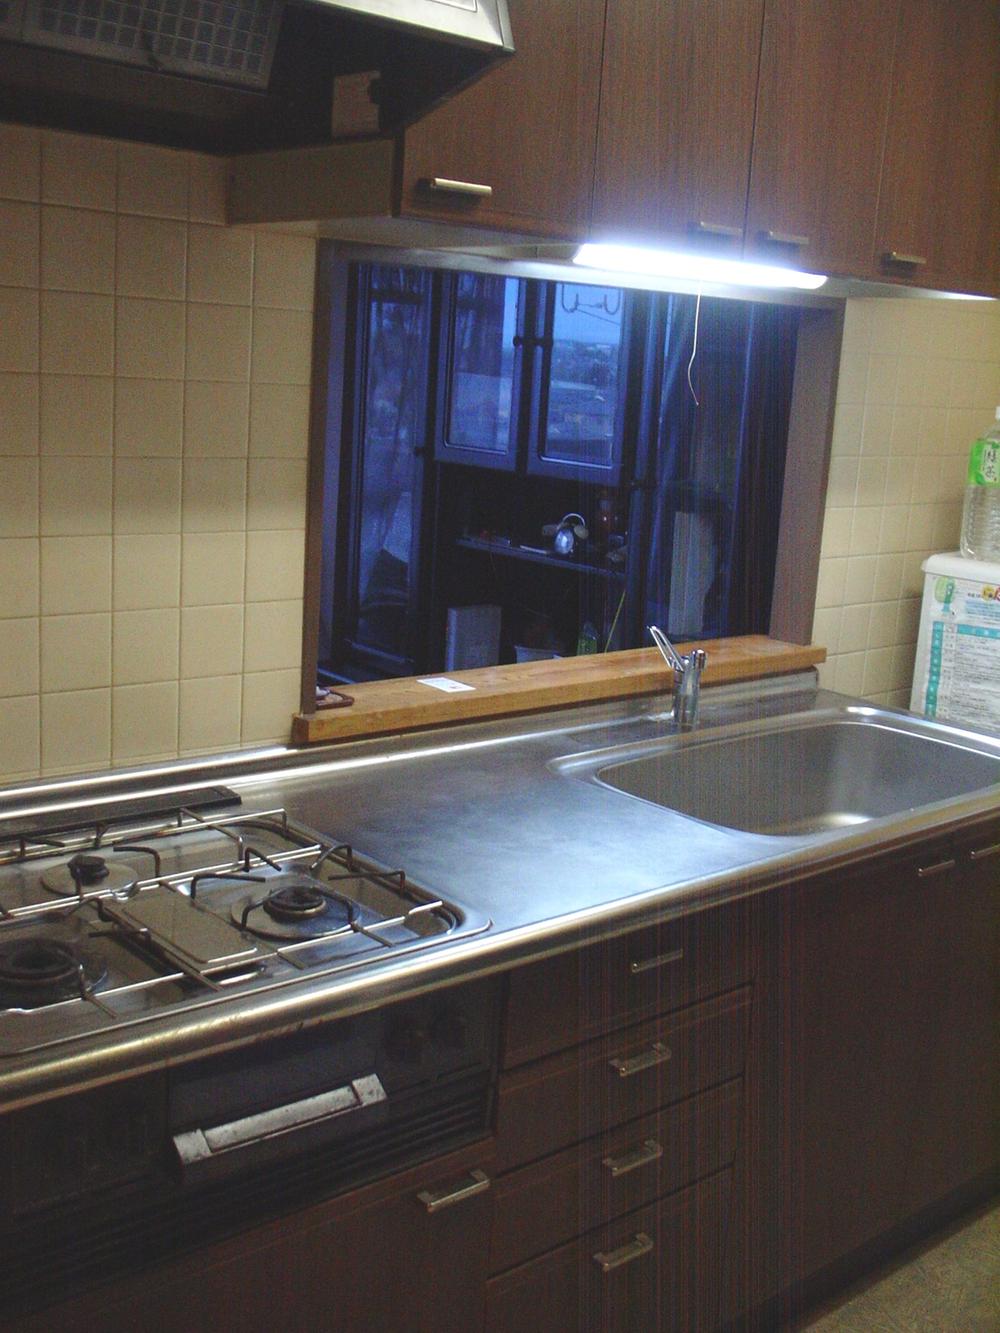 Same specifications photo (kitchen). Same construction type